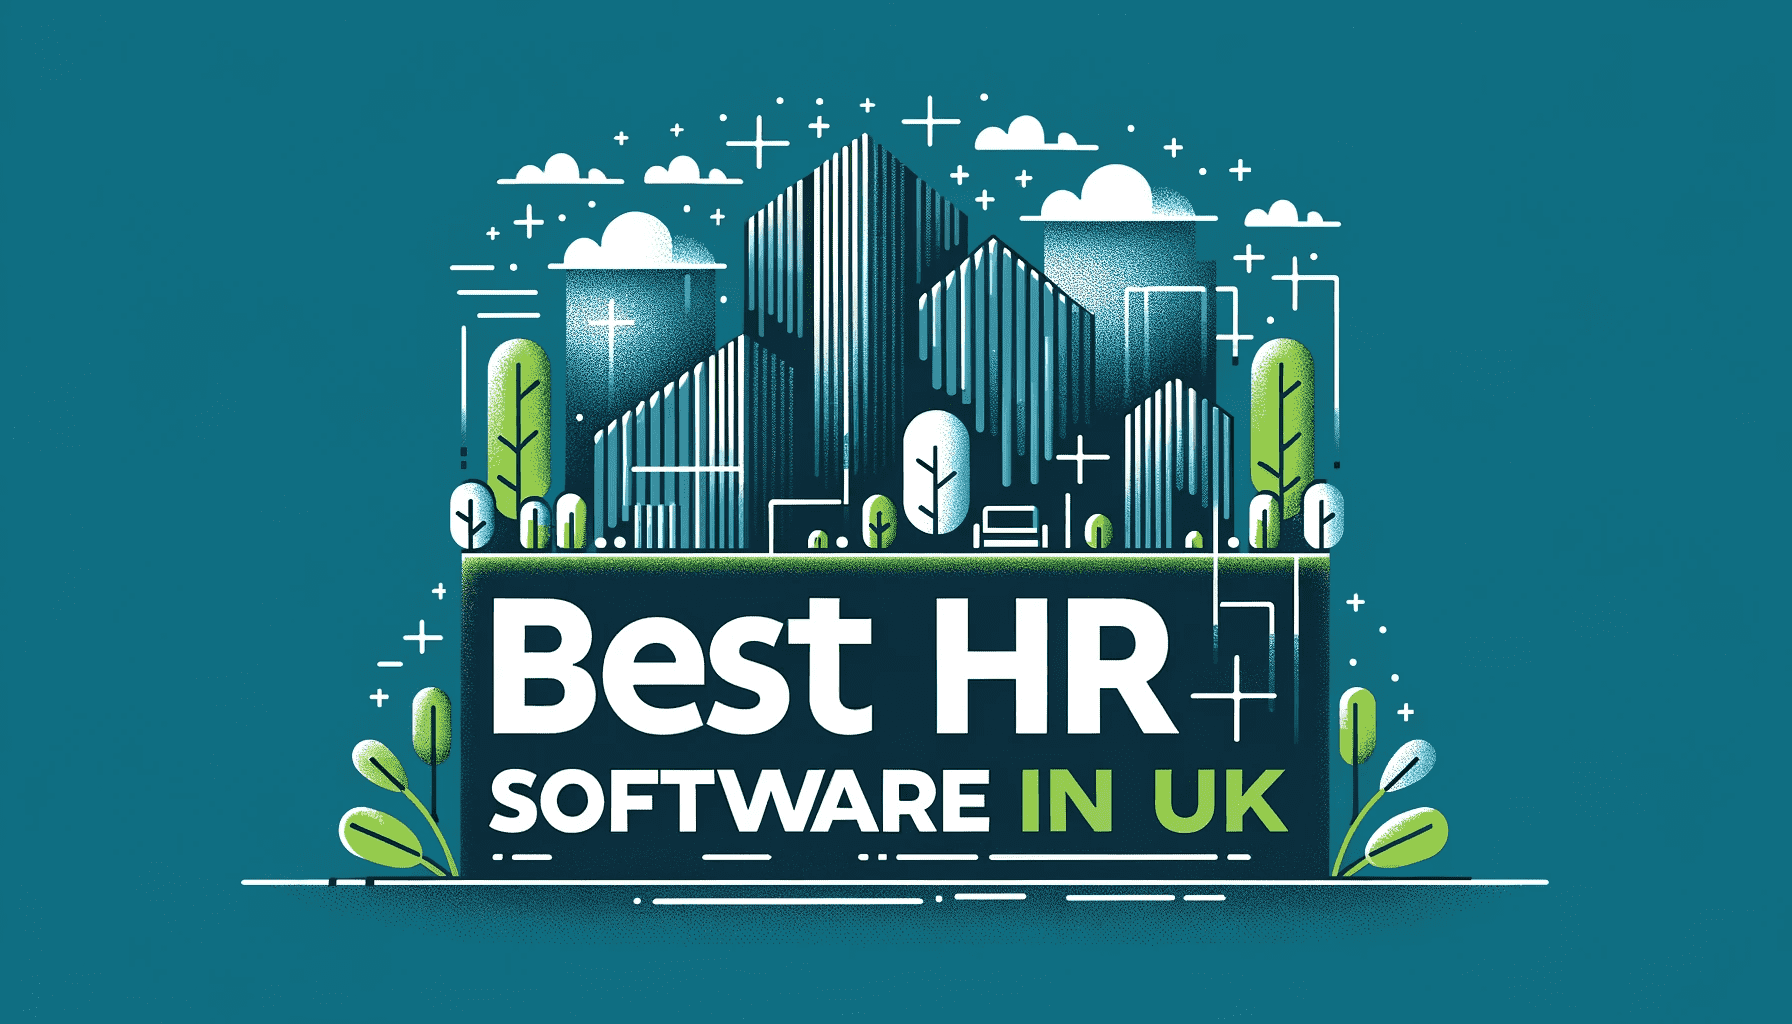 An hero image depicting office buildings in the background and mentioning "Best HR Software in UK" in the front